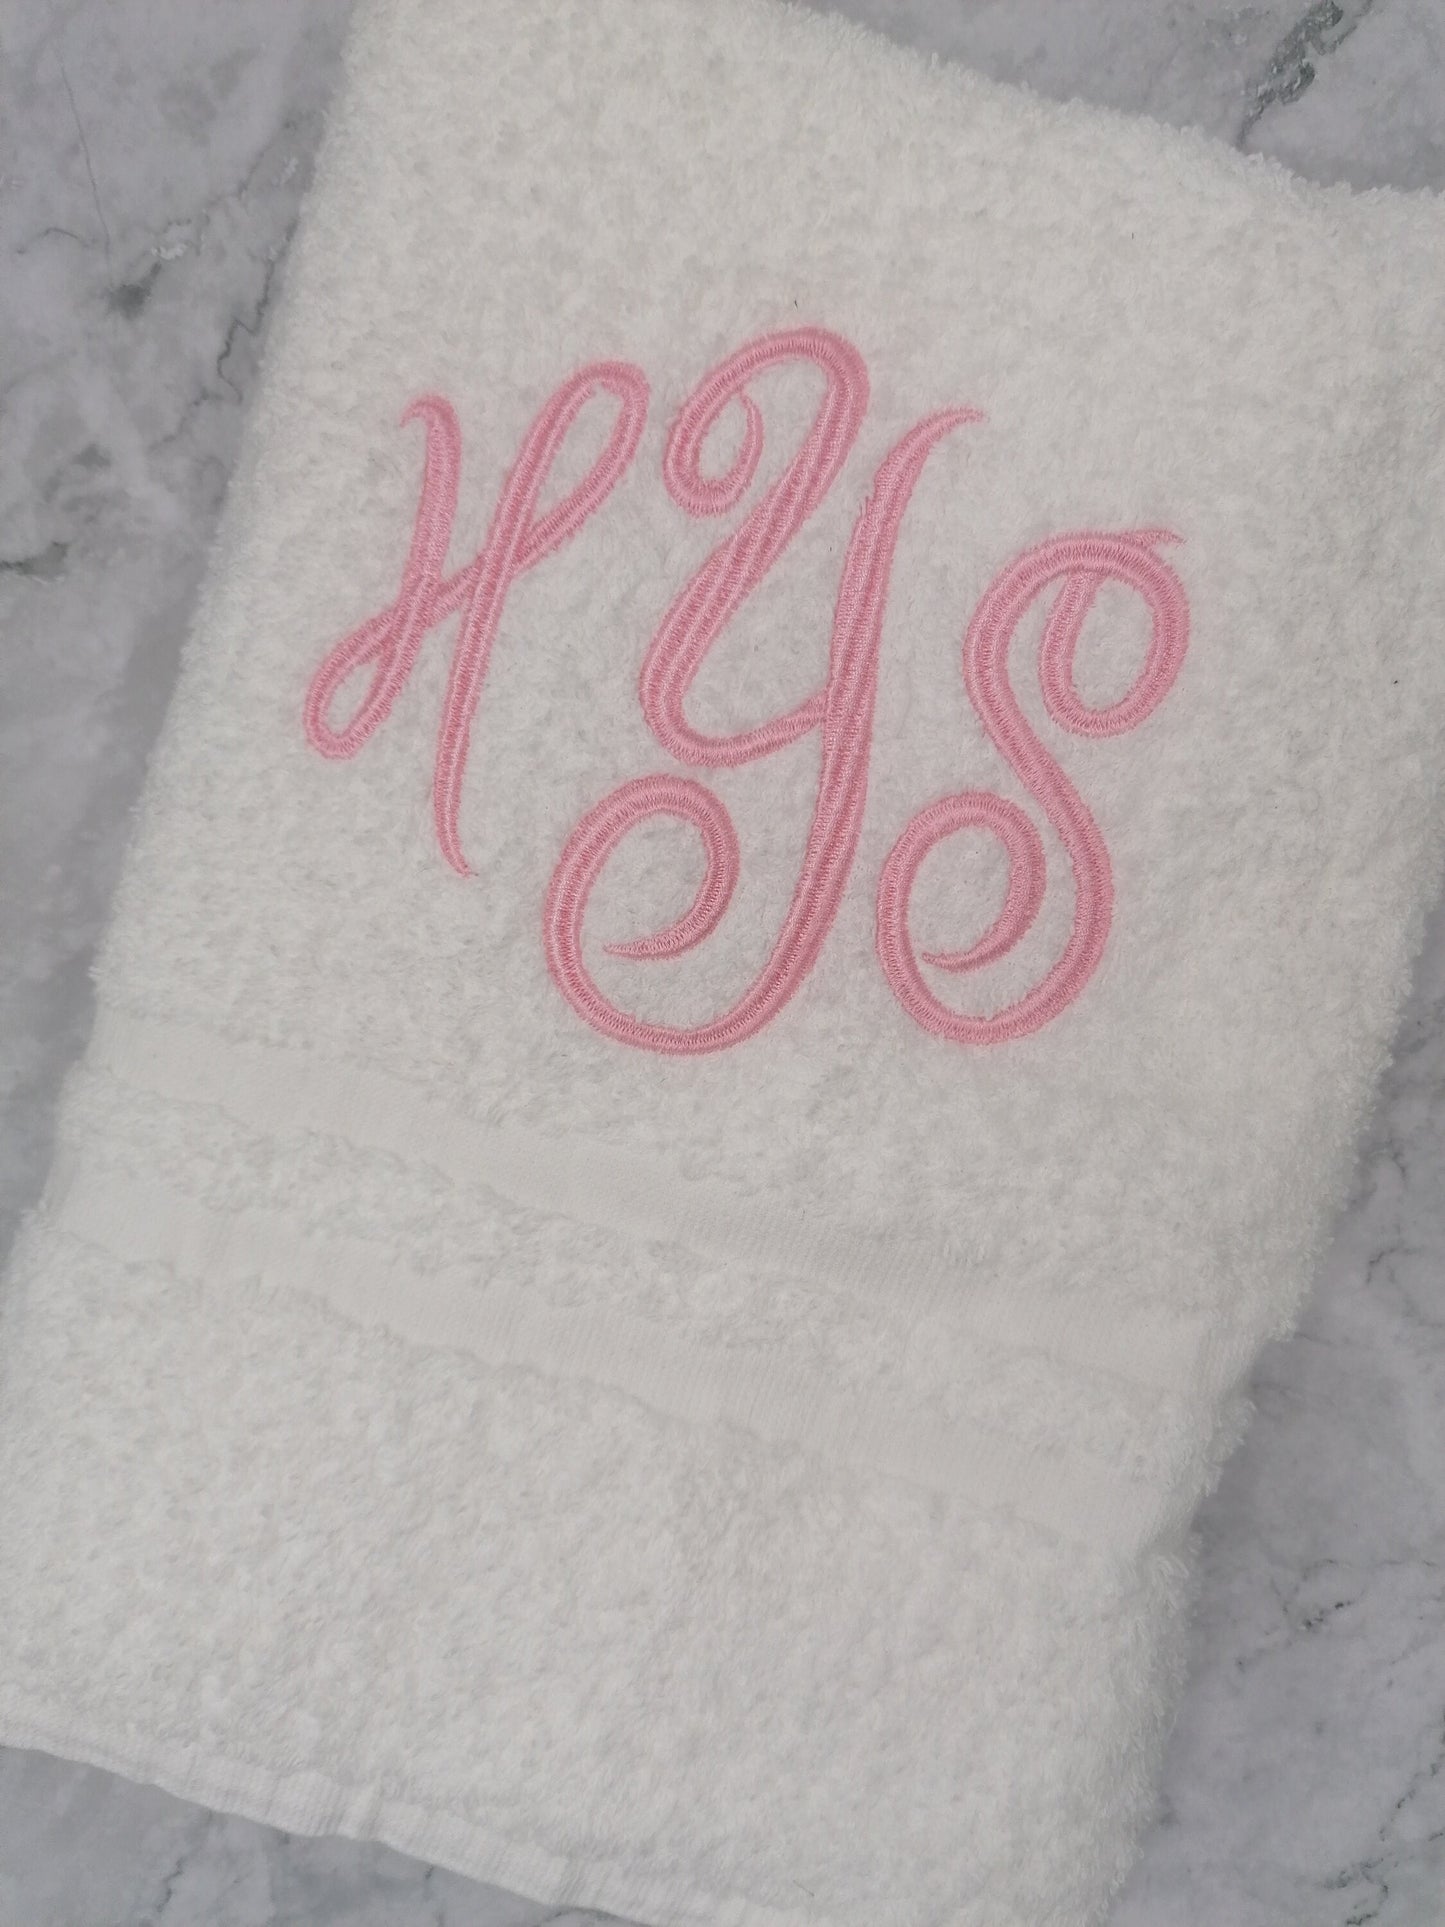 Personalized Embroidered Towel, Monogrammed Towel, Embroidered Design, Wedding Gifts, Custom Name Towel